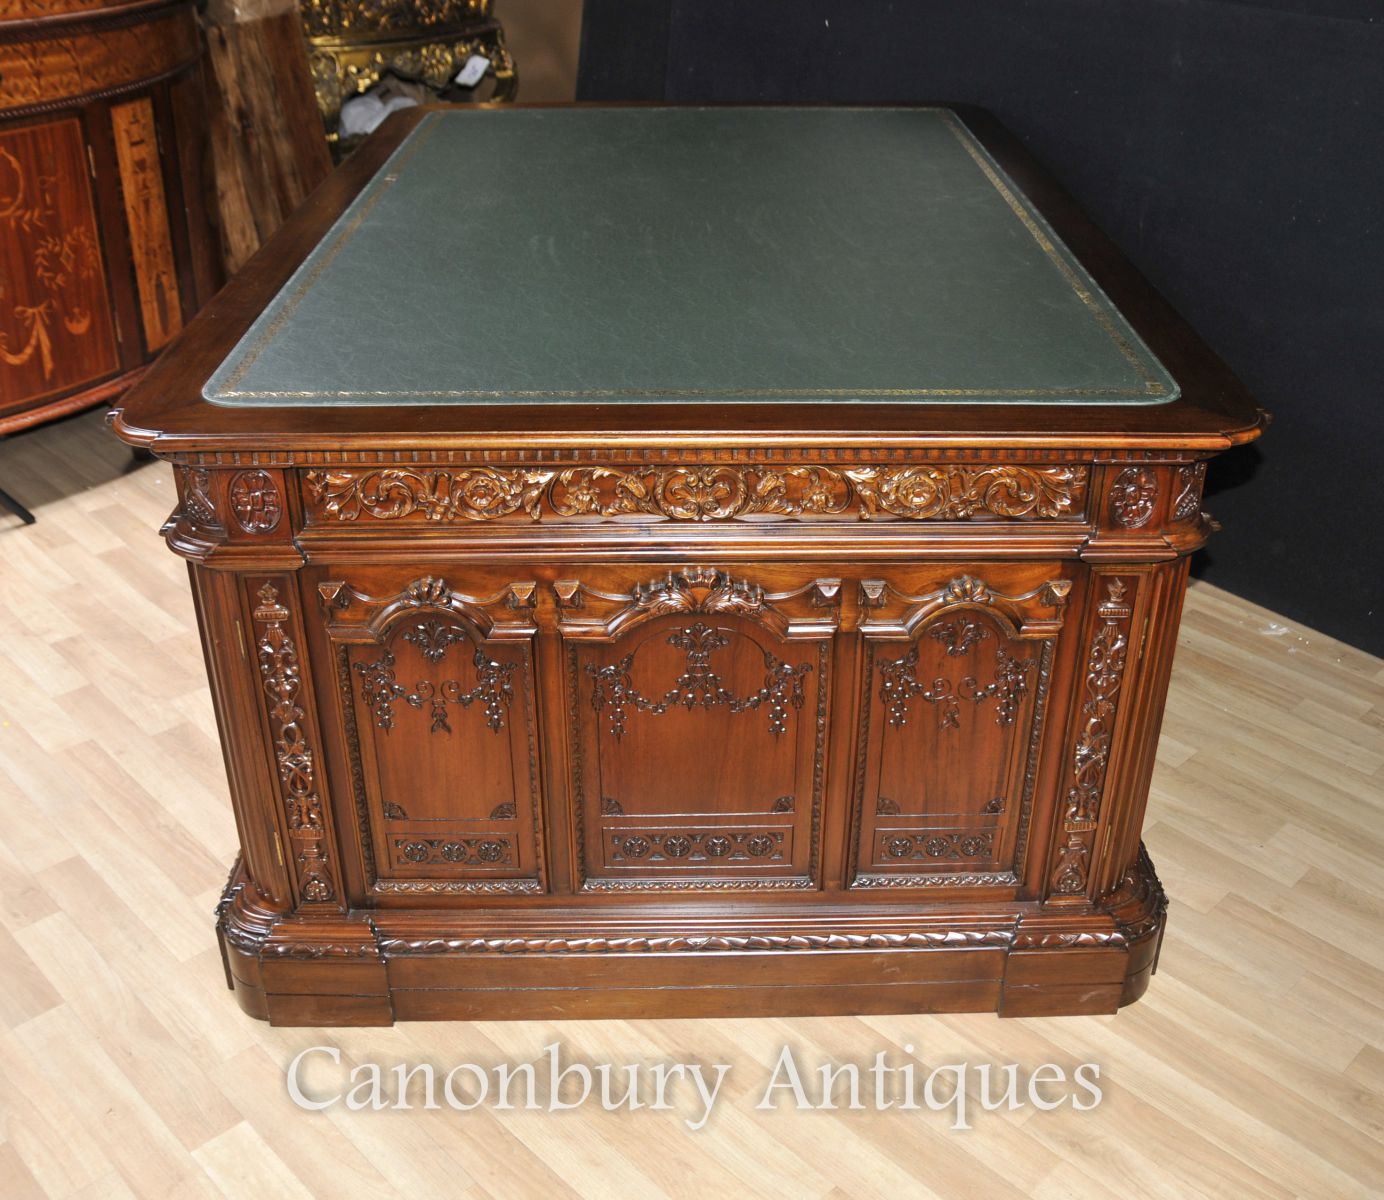 Side shot of the desk, note intricate and ornate carving